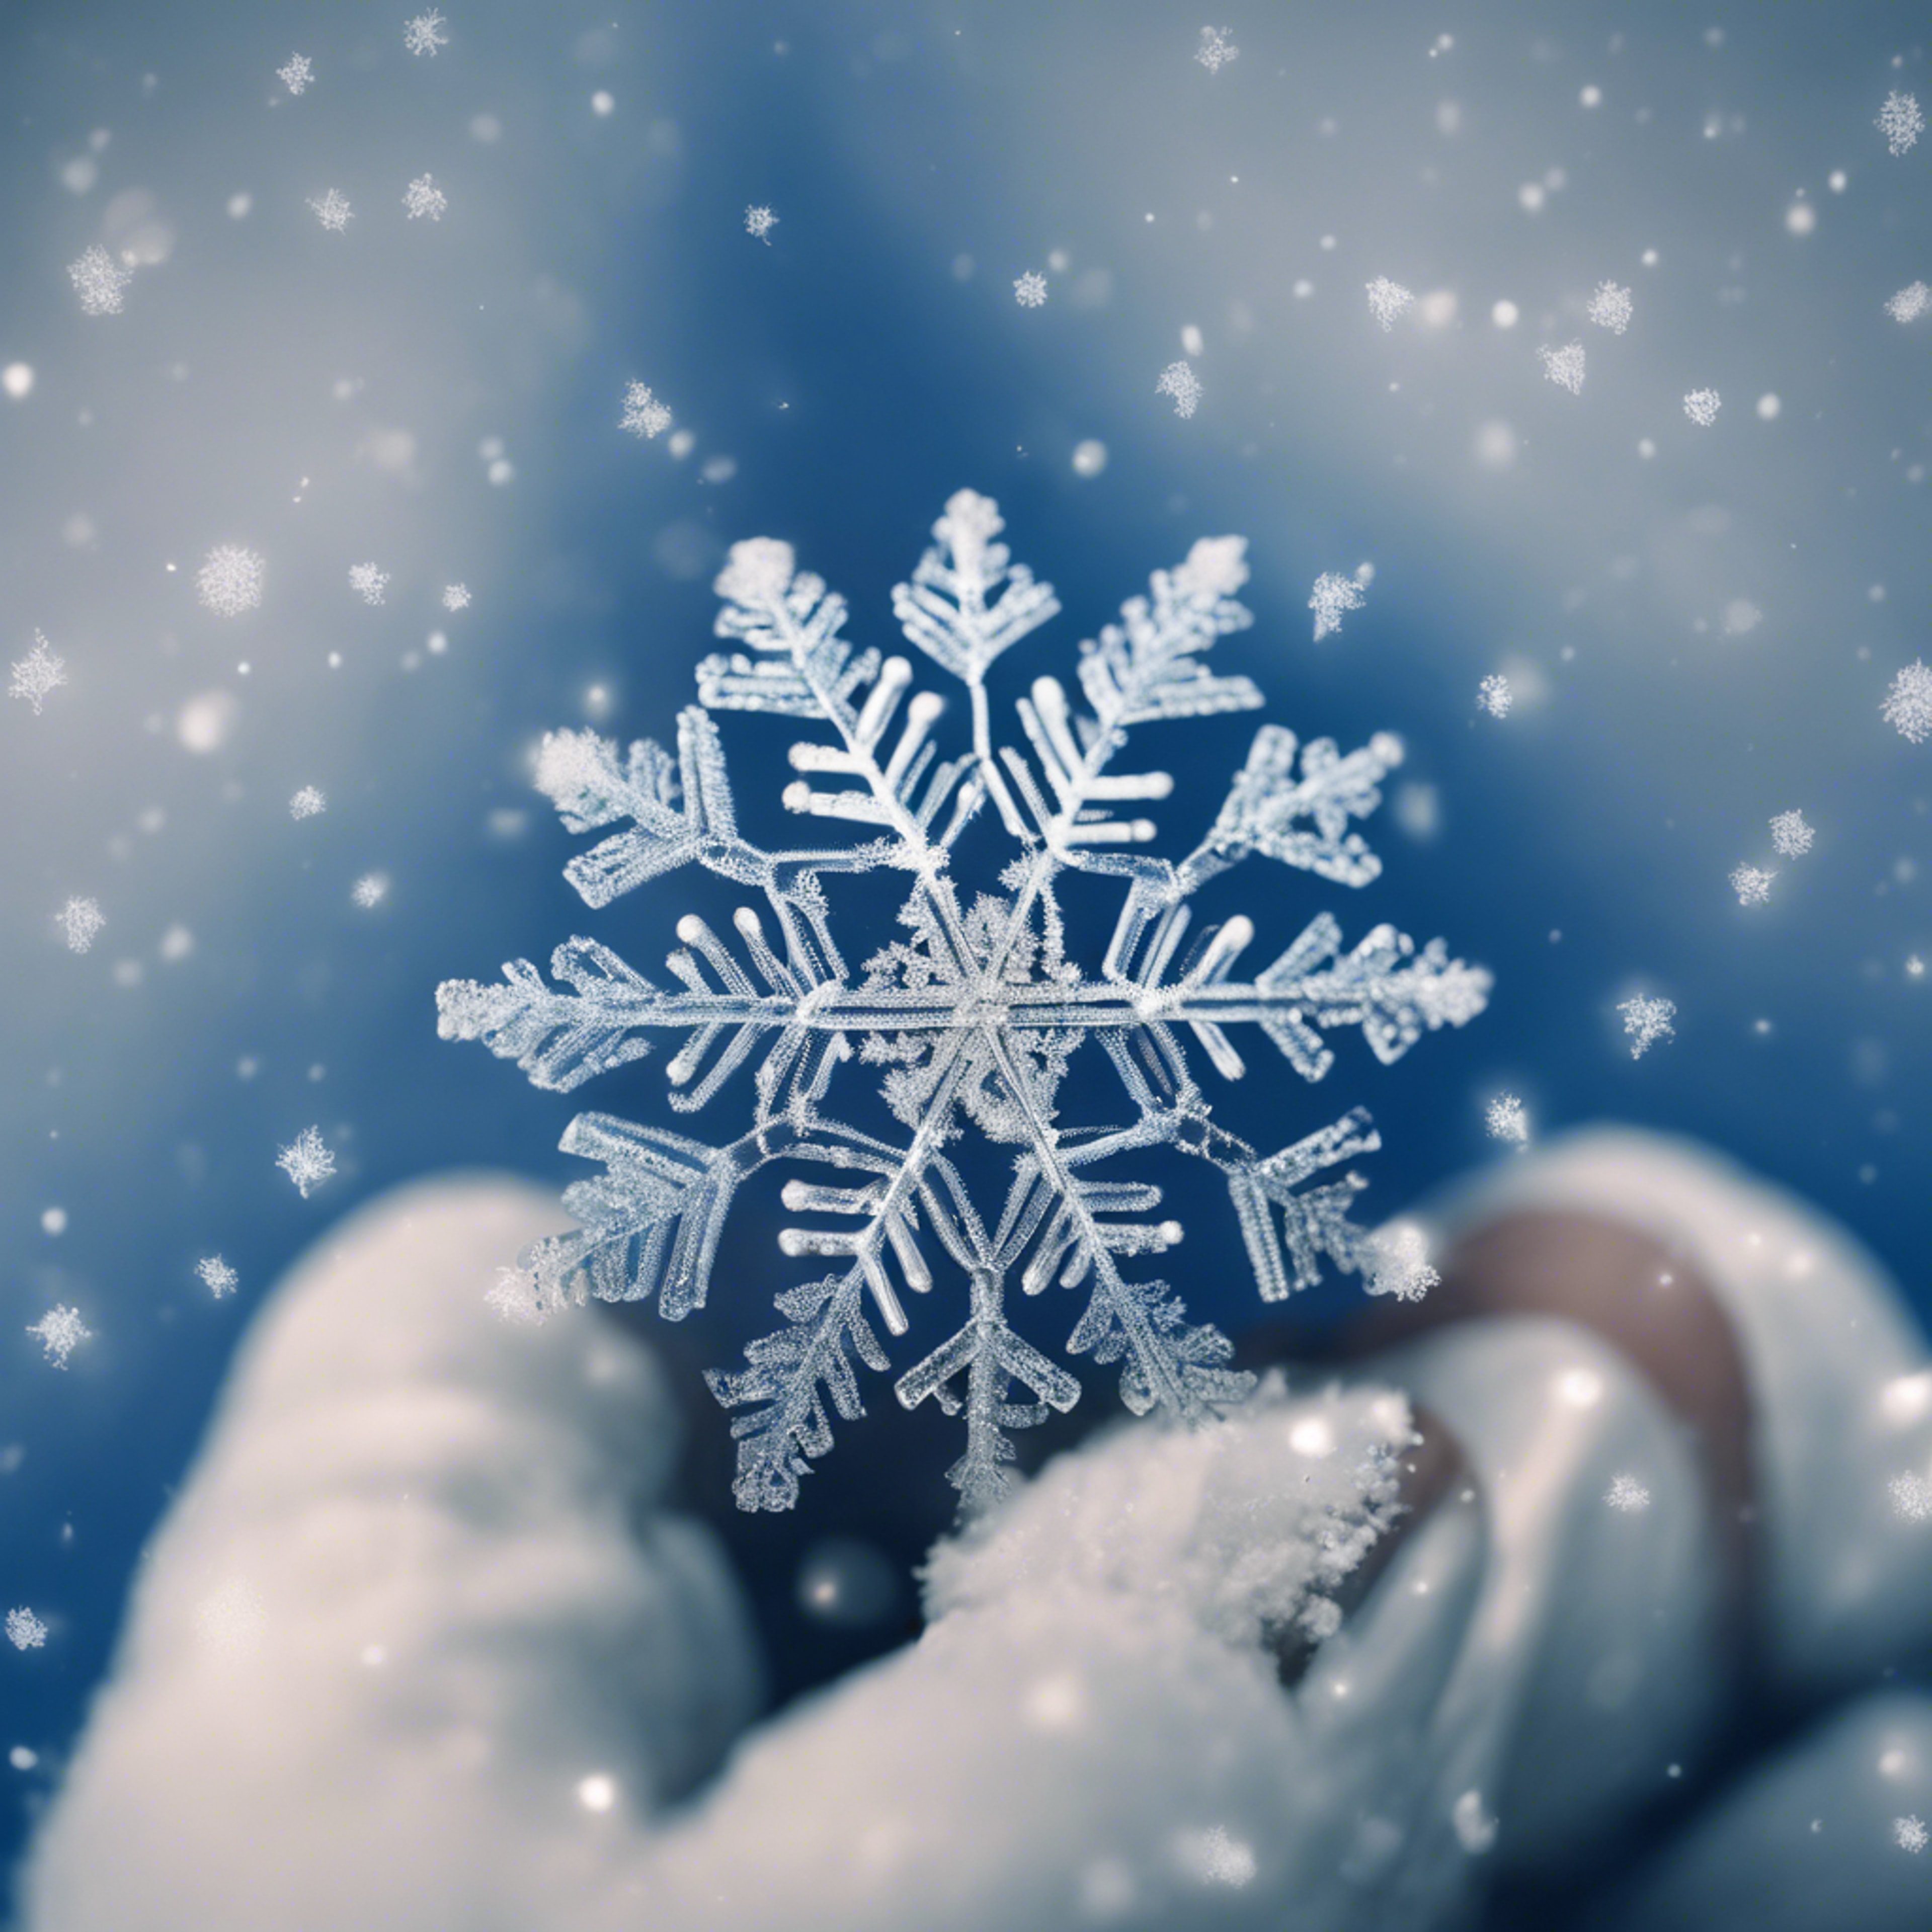 Intricate patterns of a snowflake on a blue gloved finger. Papel de parede[6c7ed0f3c74b413e9833]